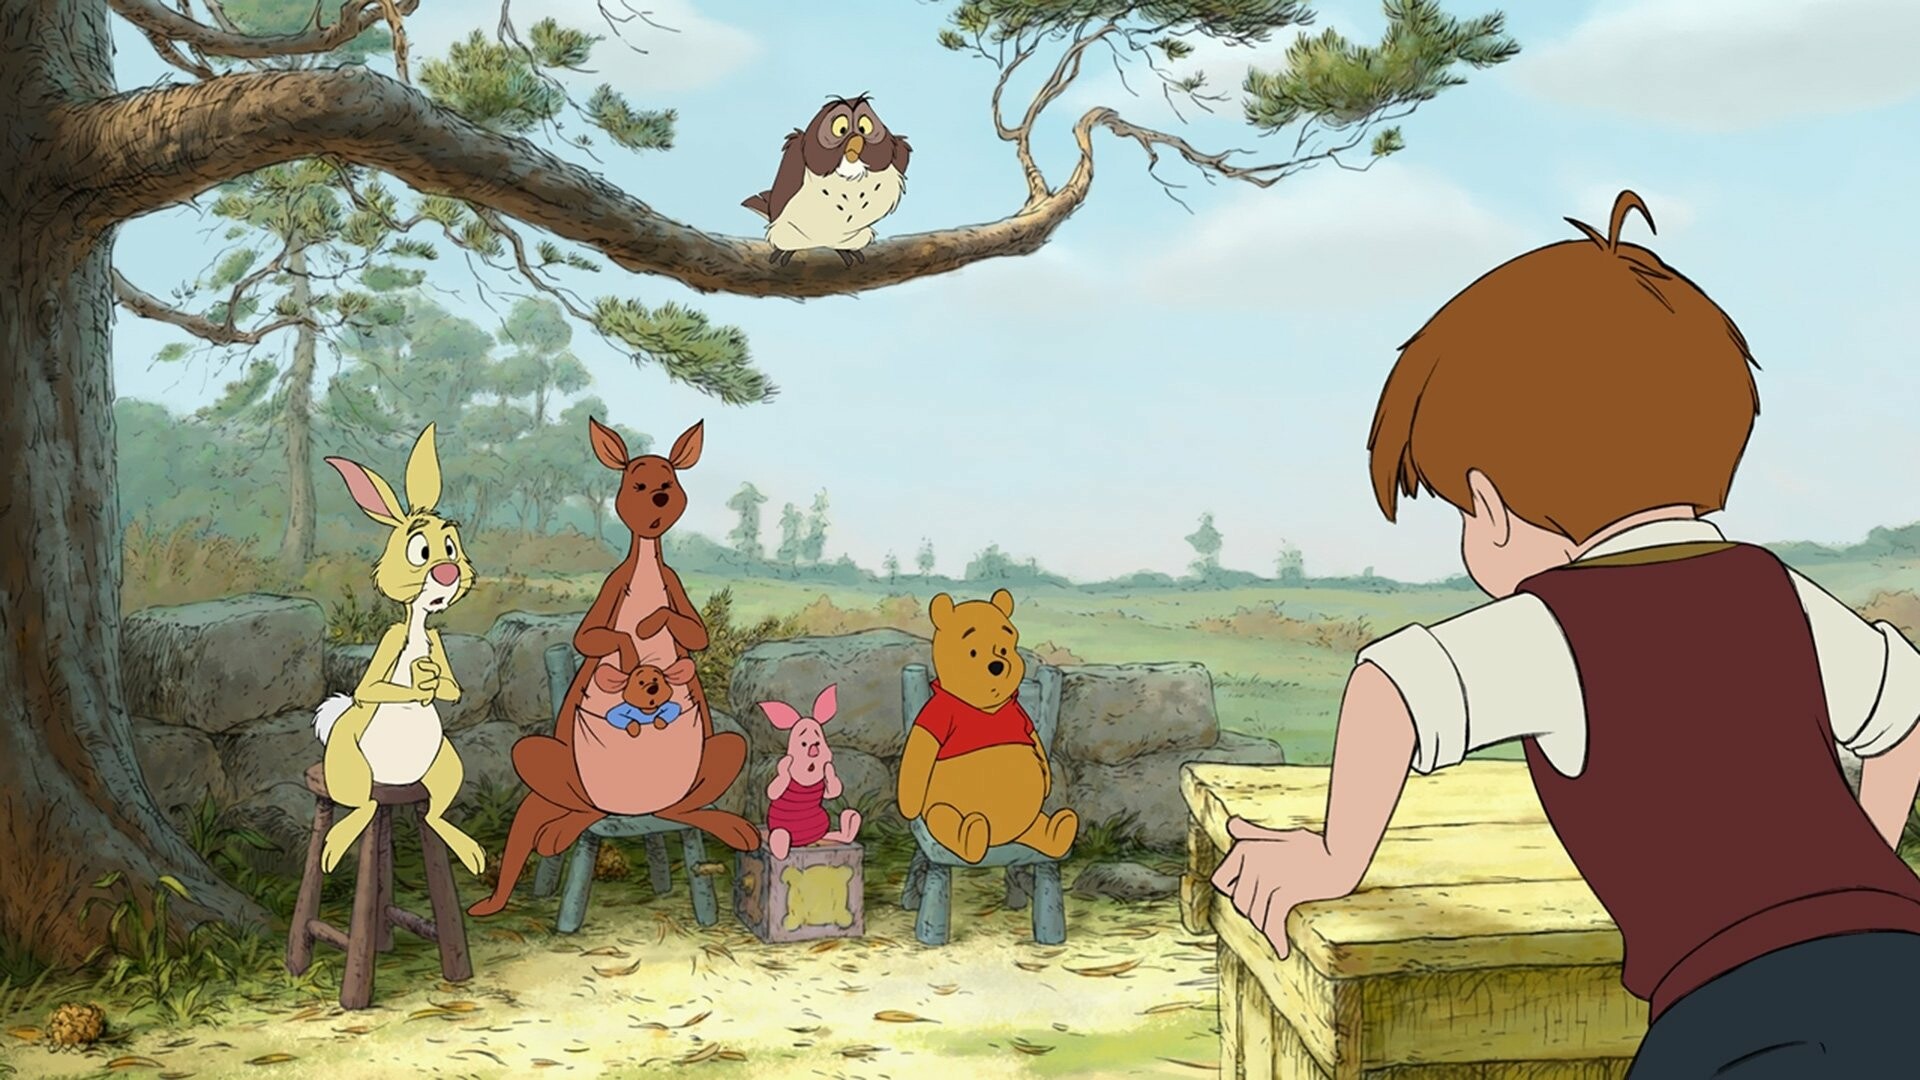 The Many Adventures of Winnie the Pooh: Sebastian Cabot narrates the adventures of a bumbling bear as he battles a nest of vicious bees over a trove of honey, weathers a terrible wind storm, and endures the foibles of the hyperactive tiger Tigger. 1920x1080 Full HD Background.